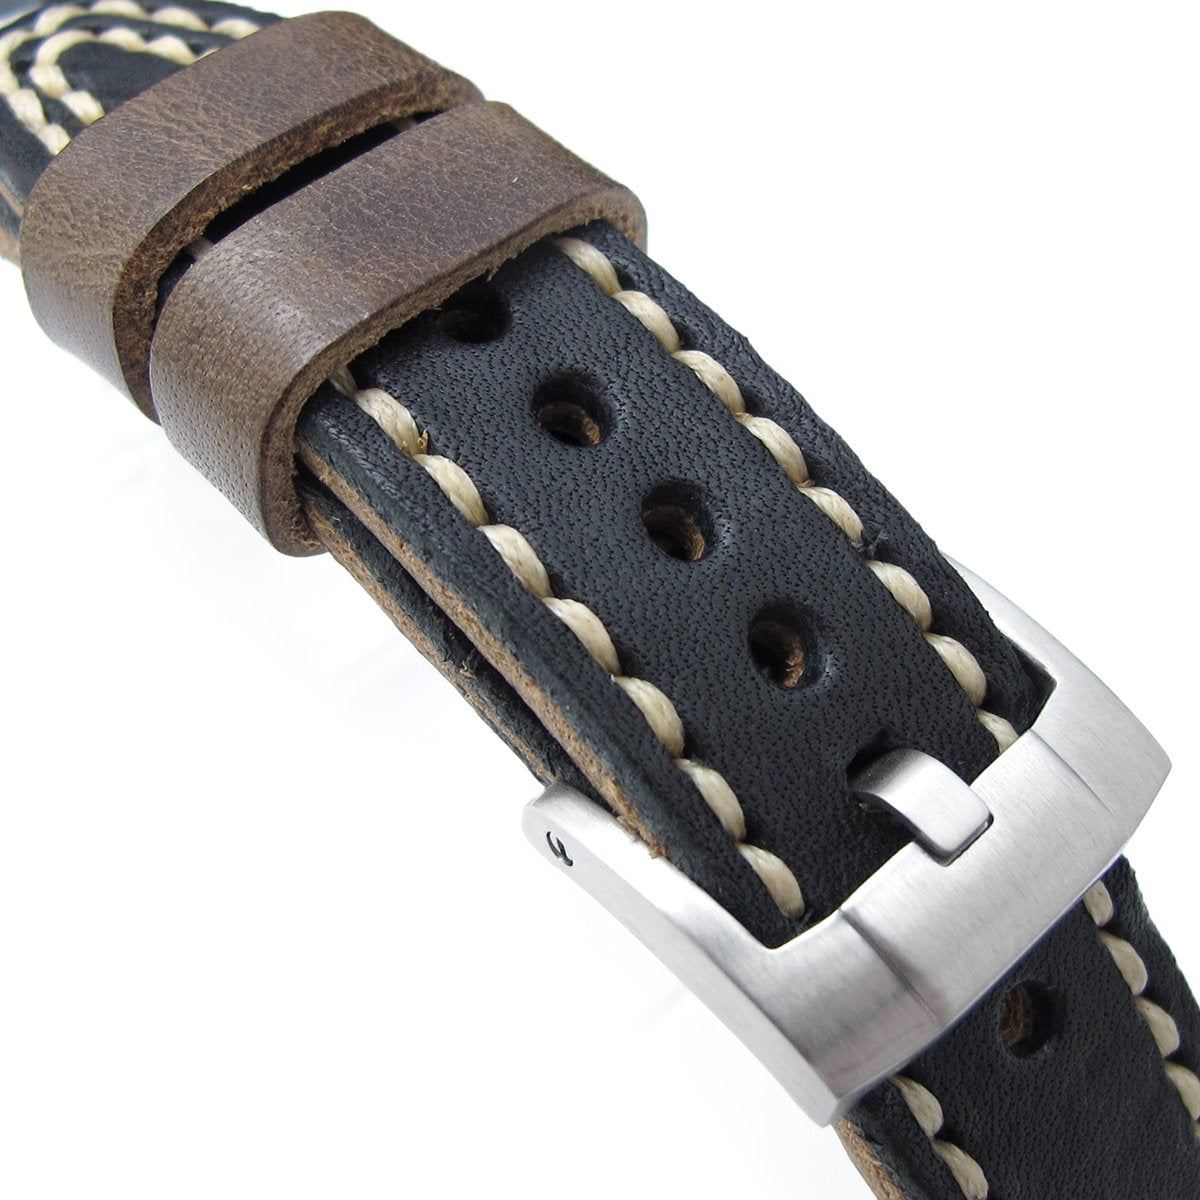 21mm 22mm MiLTAT Black Pull Up Aniline Italian Leather Watch Strap Rivet Military strap Strapcode Watch Bands